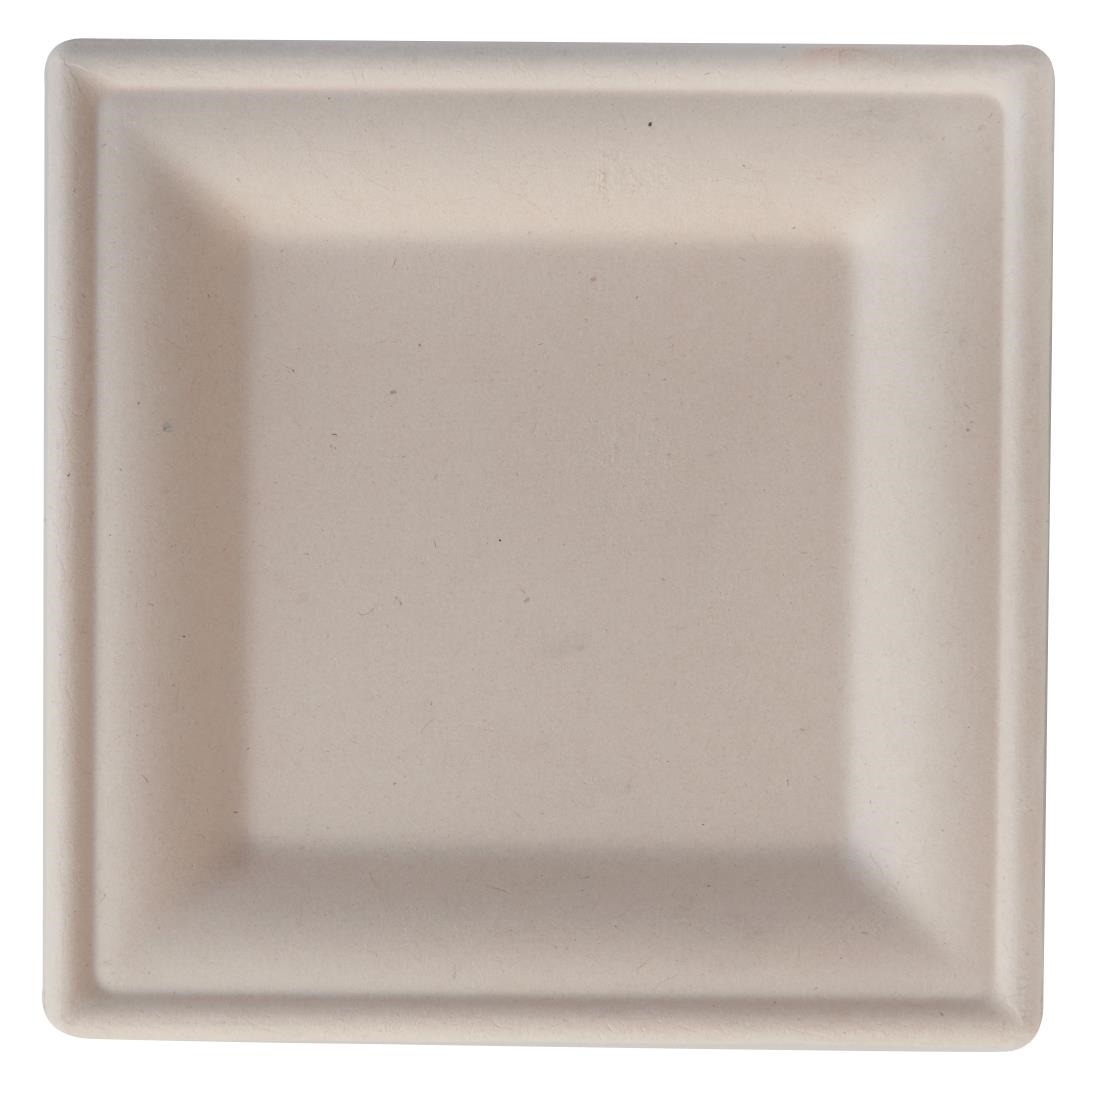 eGreen Eco-Fibre Compostable Wheat Square Plates 200mm (Pack of 500)